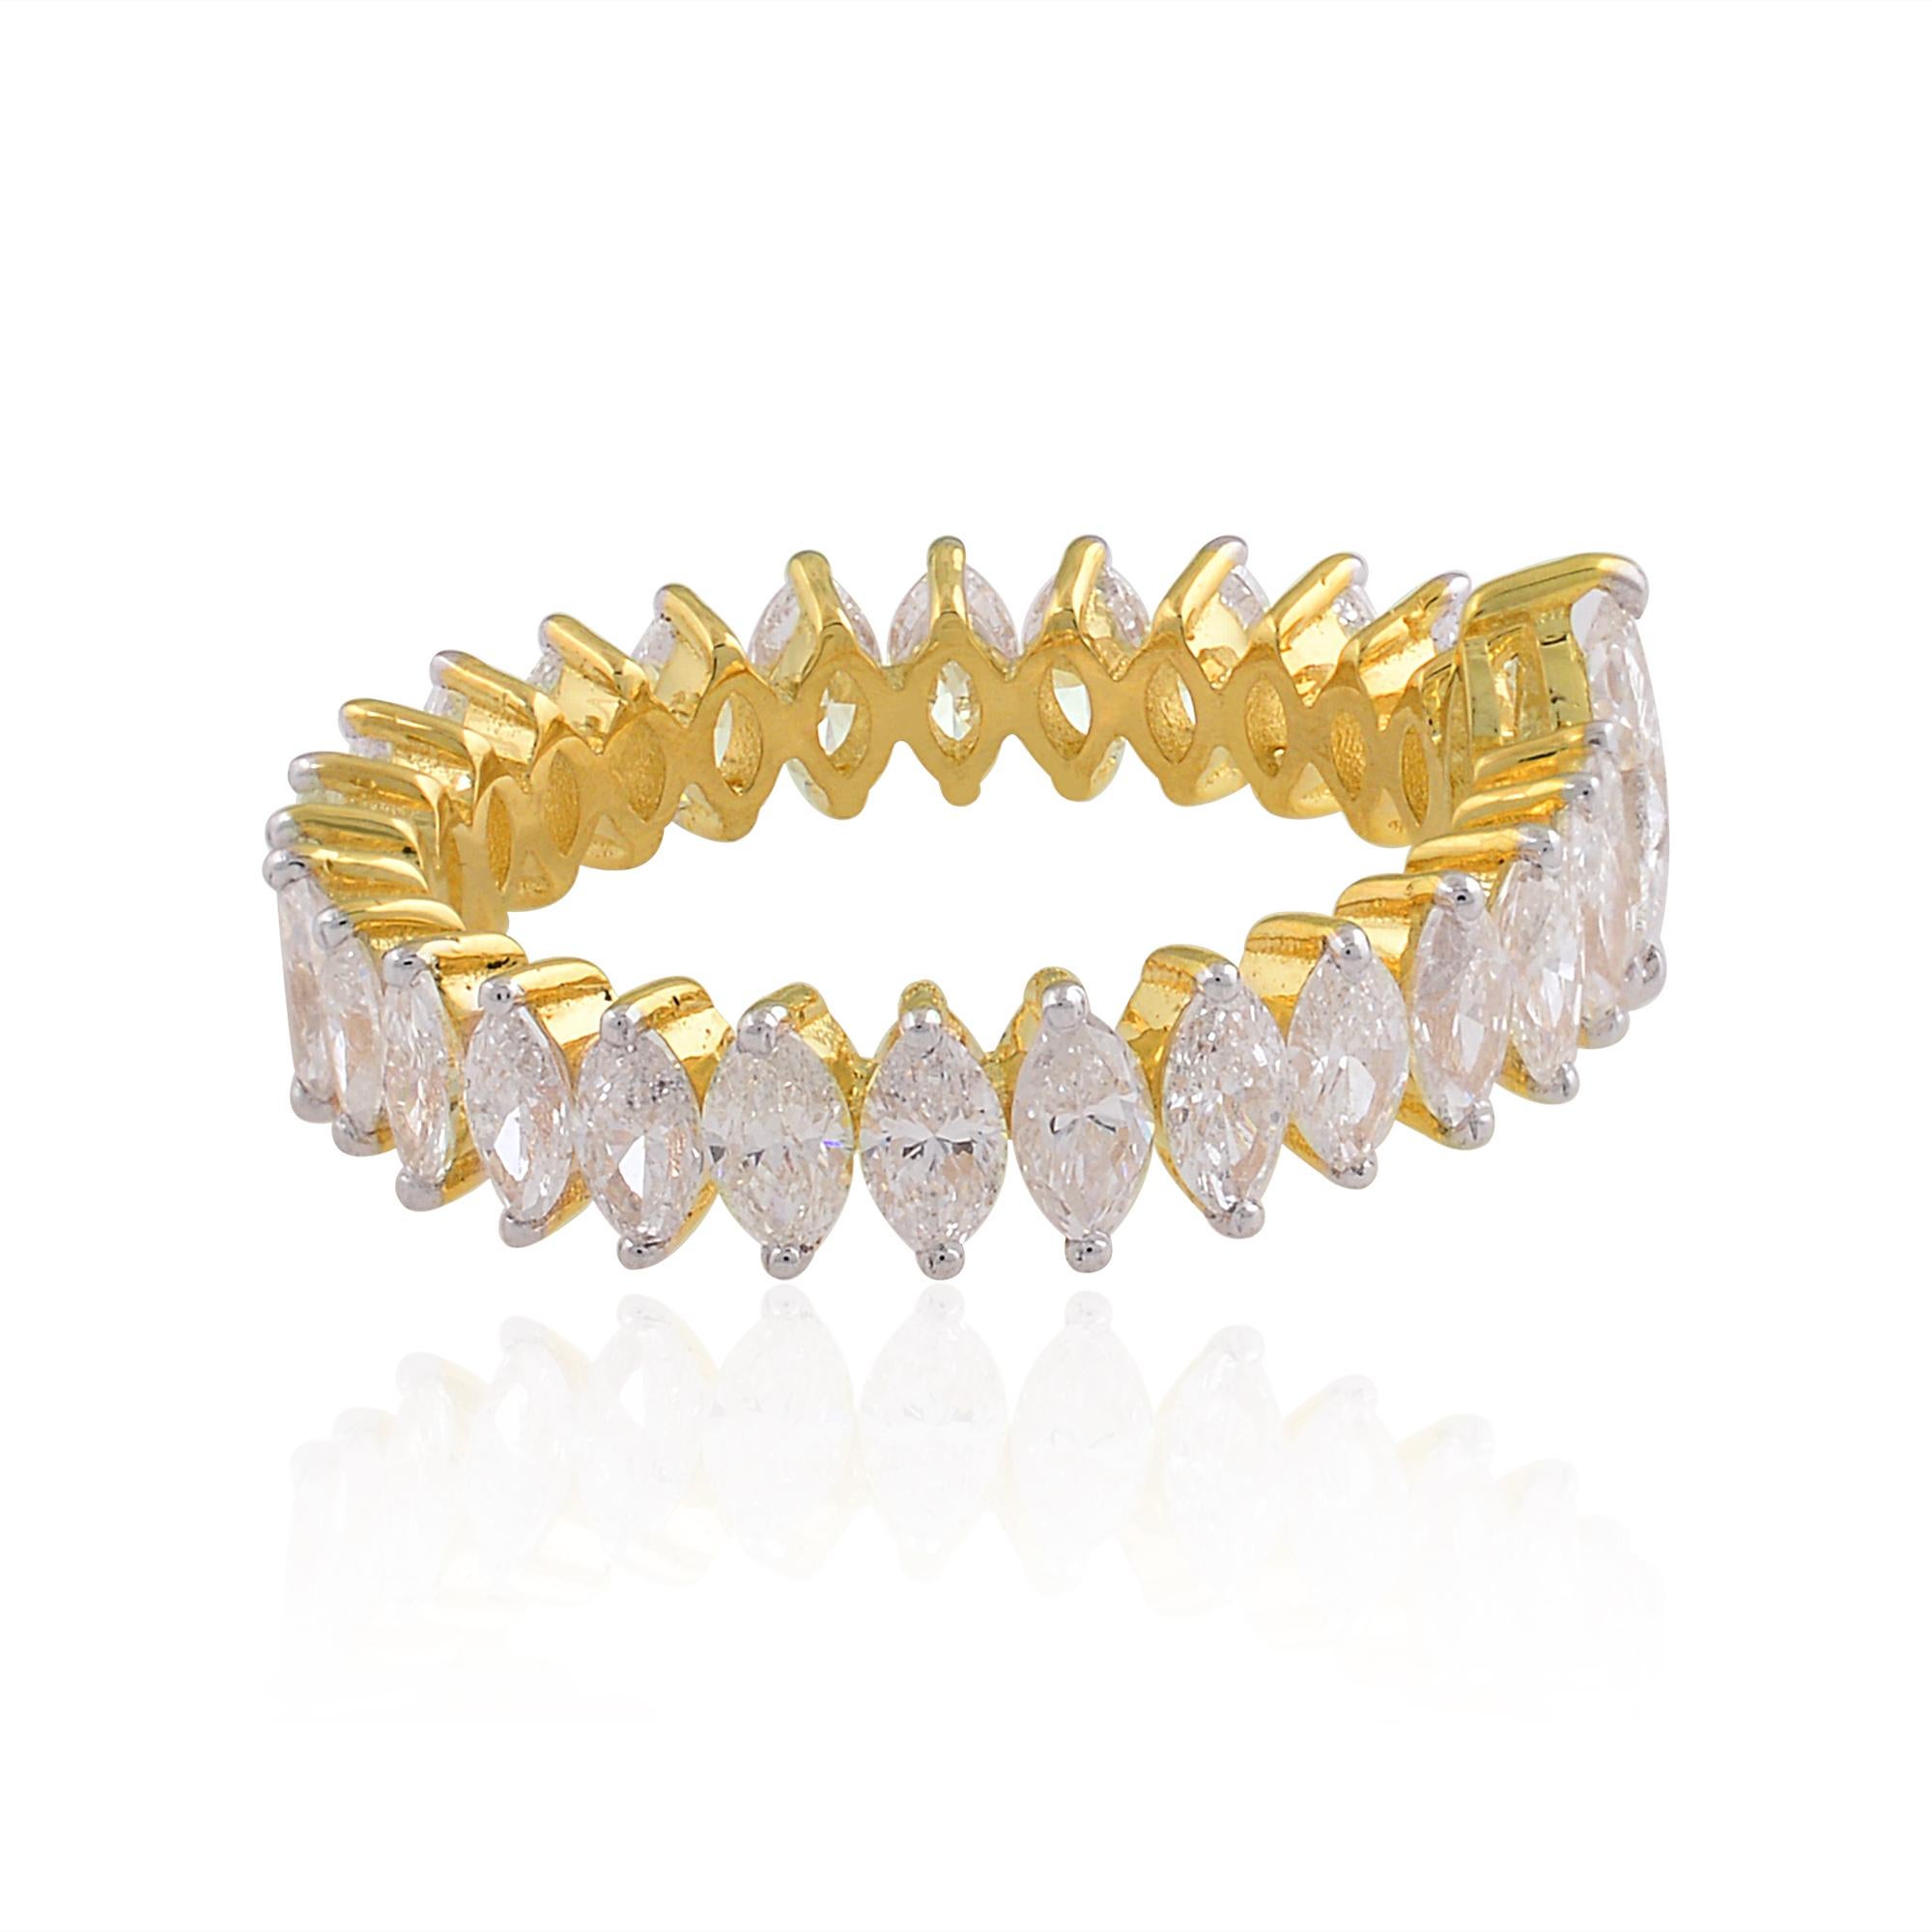 For Sale:  2.60 Carat Marquise Diamond Band Ring Solid 18k Yellow Gold Handmade Jewelry 2